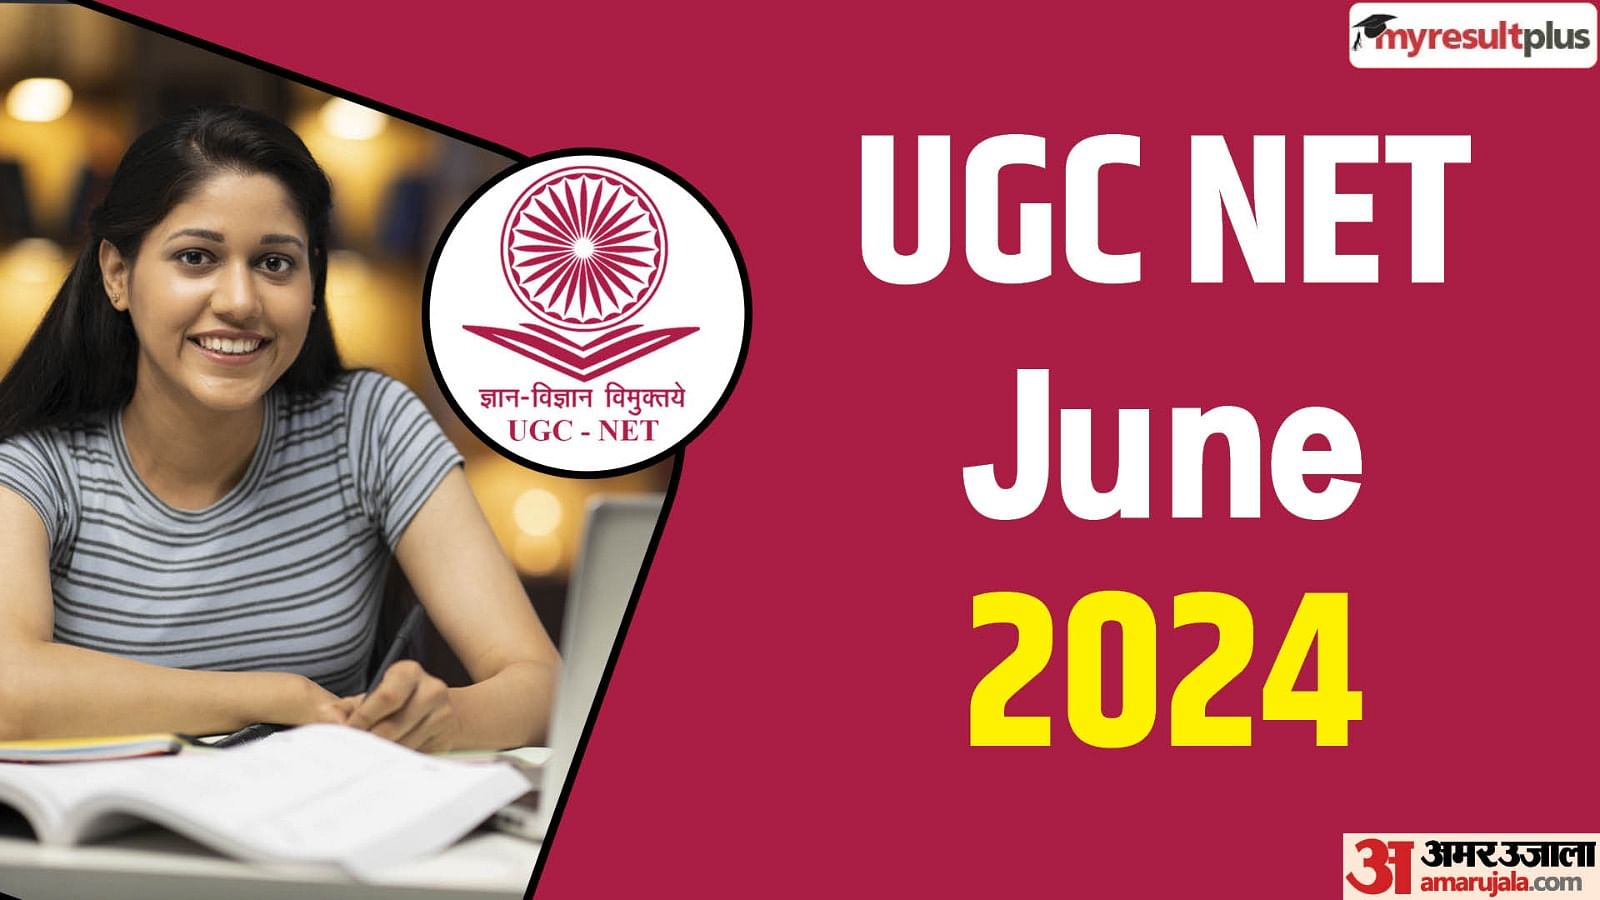 UGC NET 2024 New exam dates for Cancelled June Test announced, Check latest update here